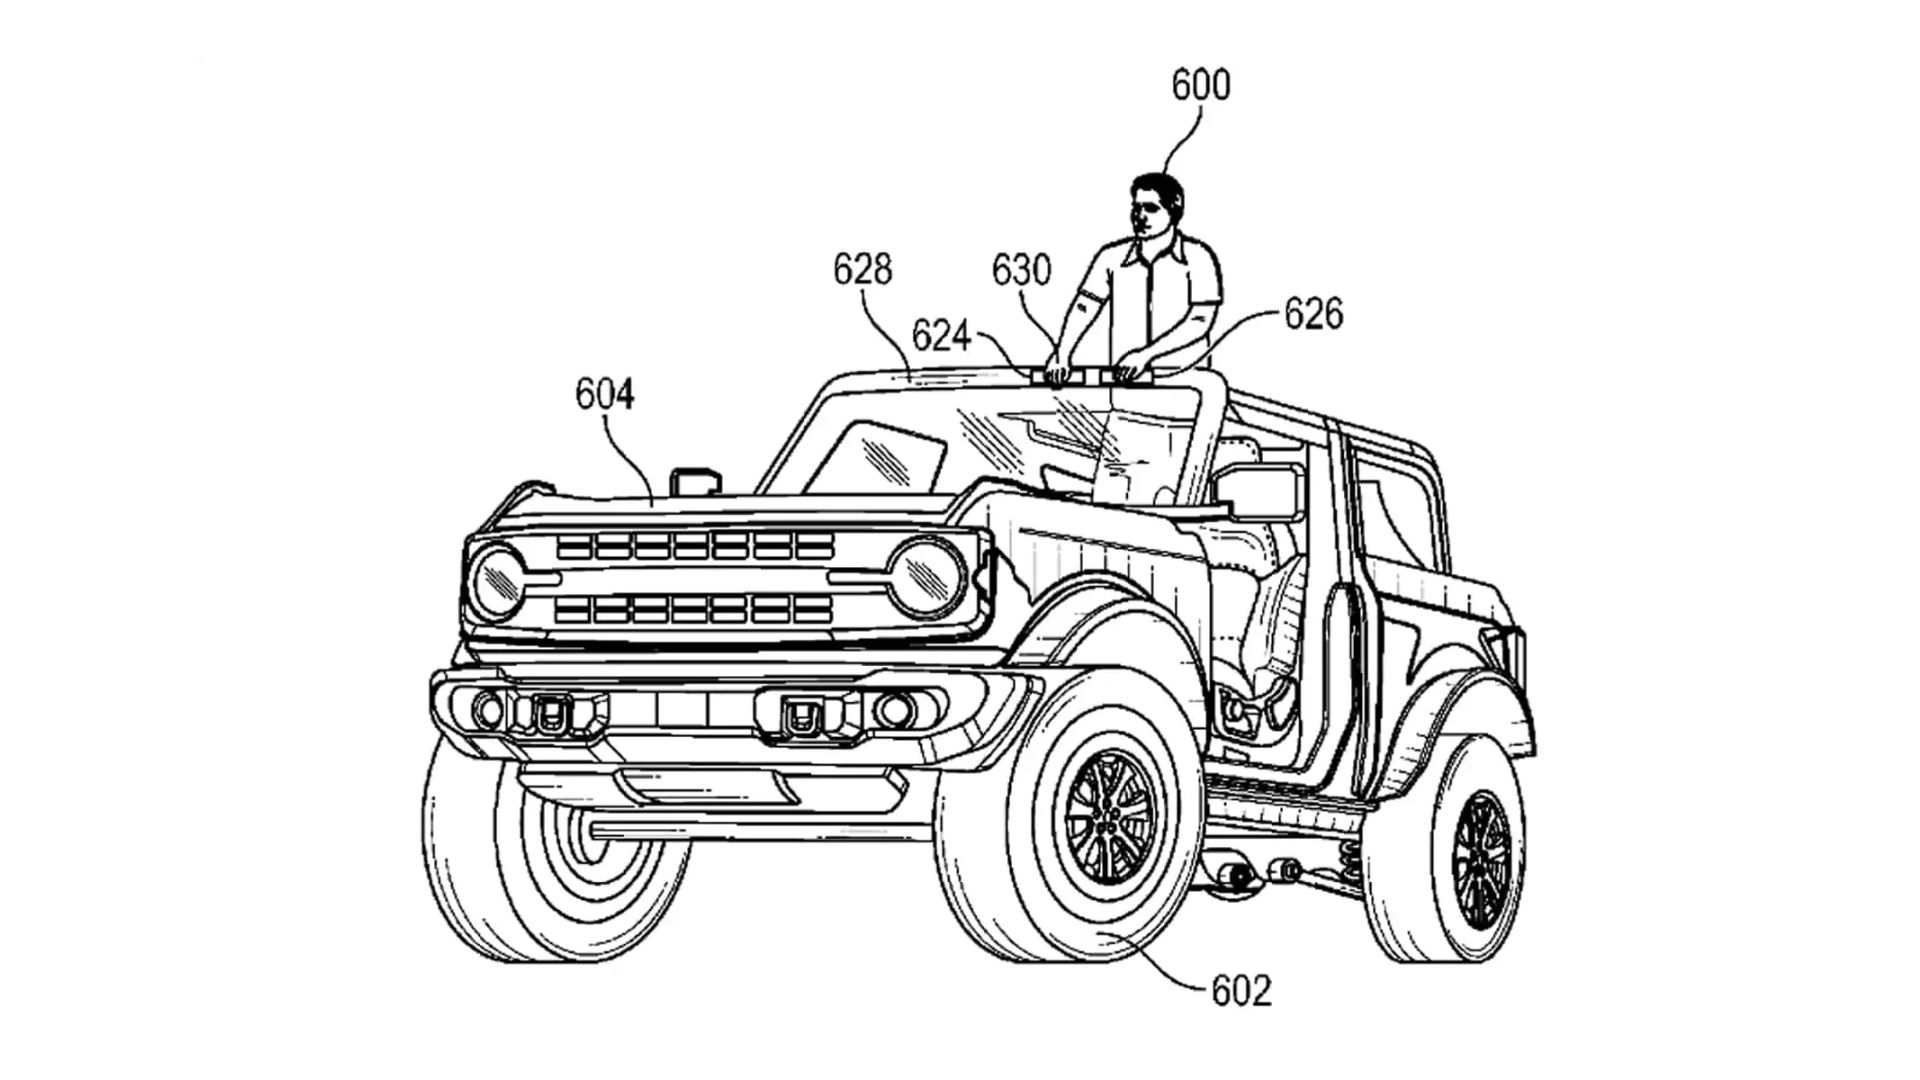 Ford patents standing while driving tech